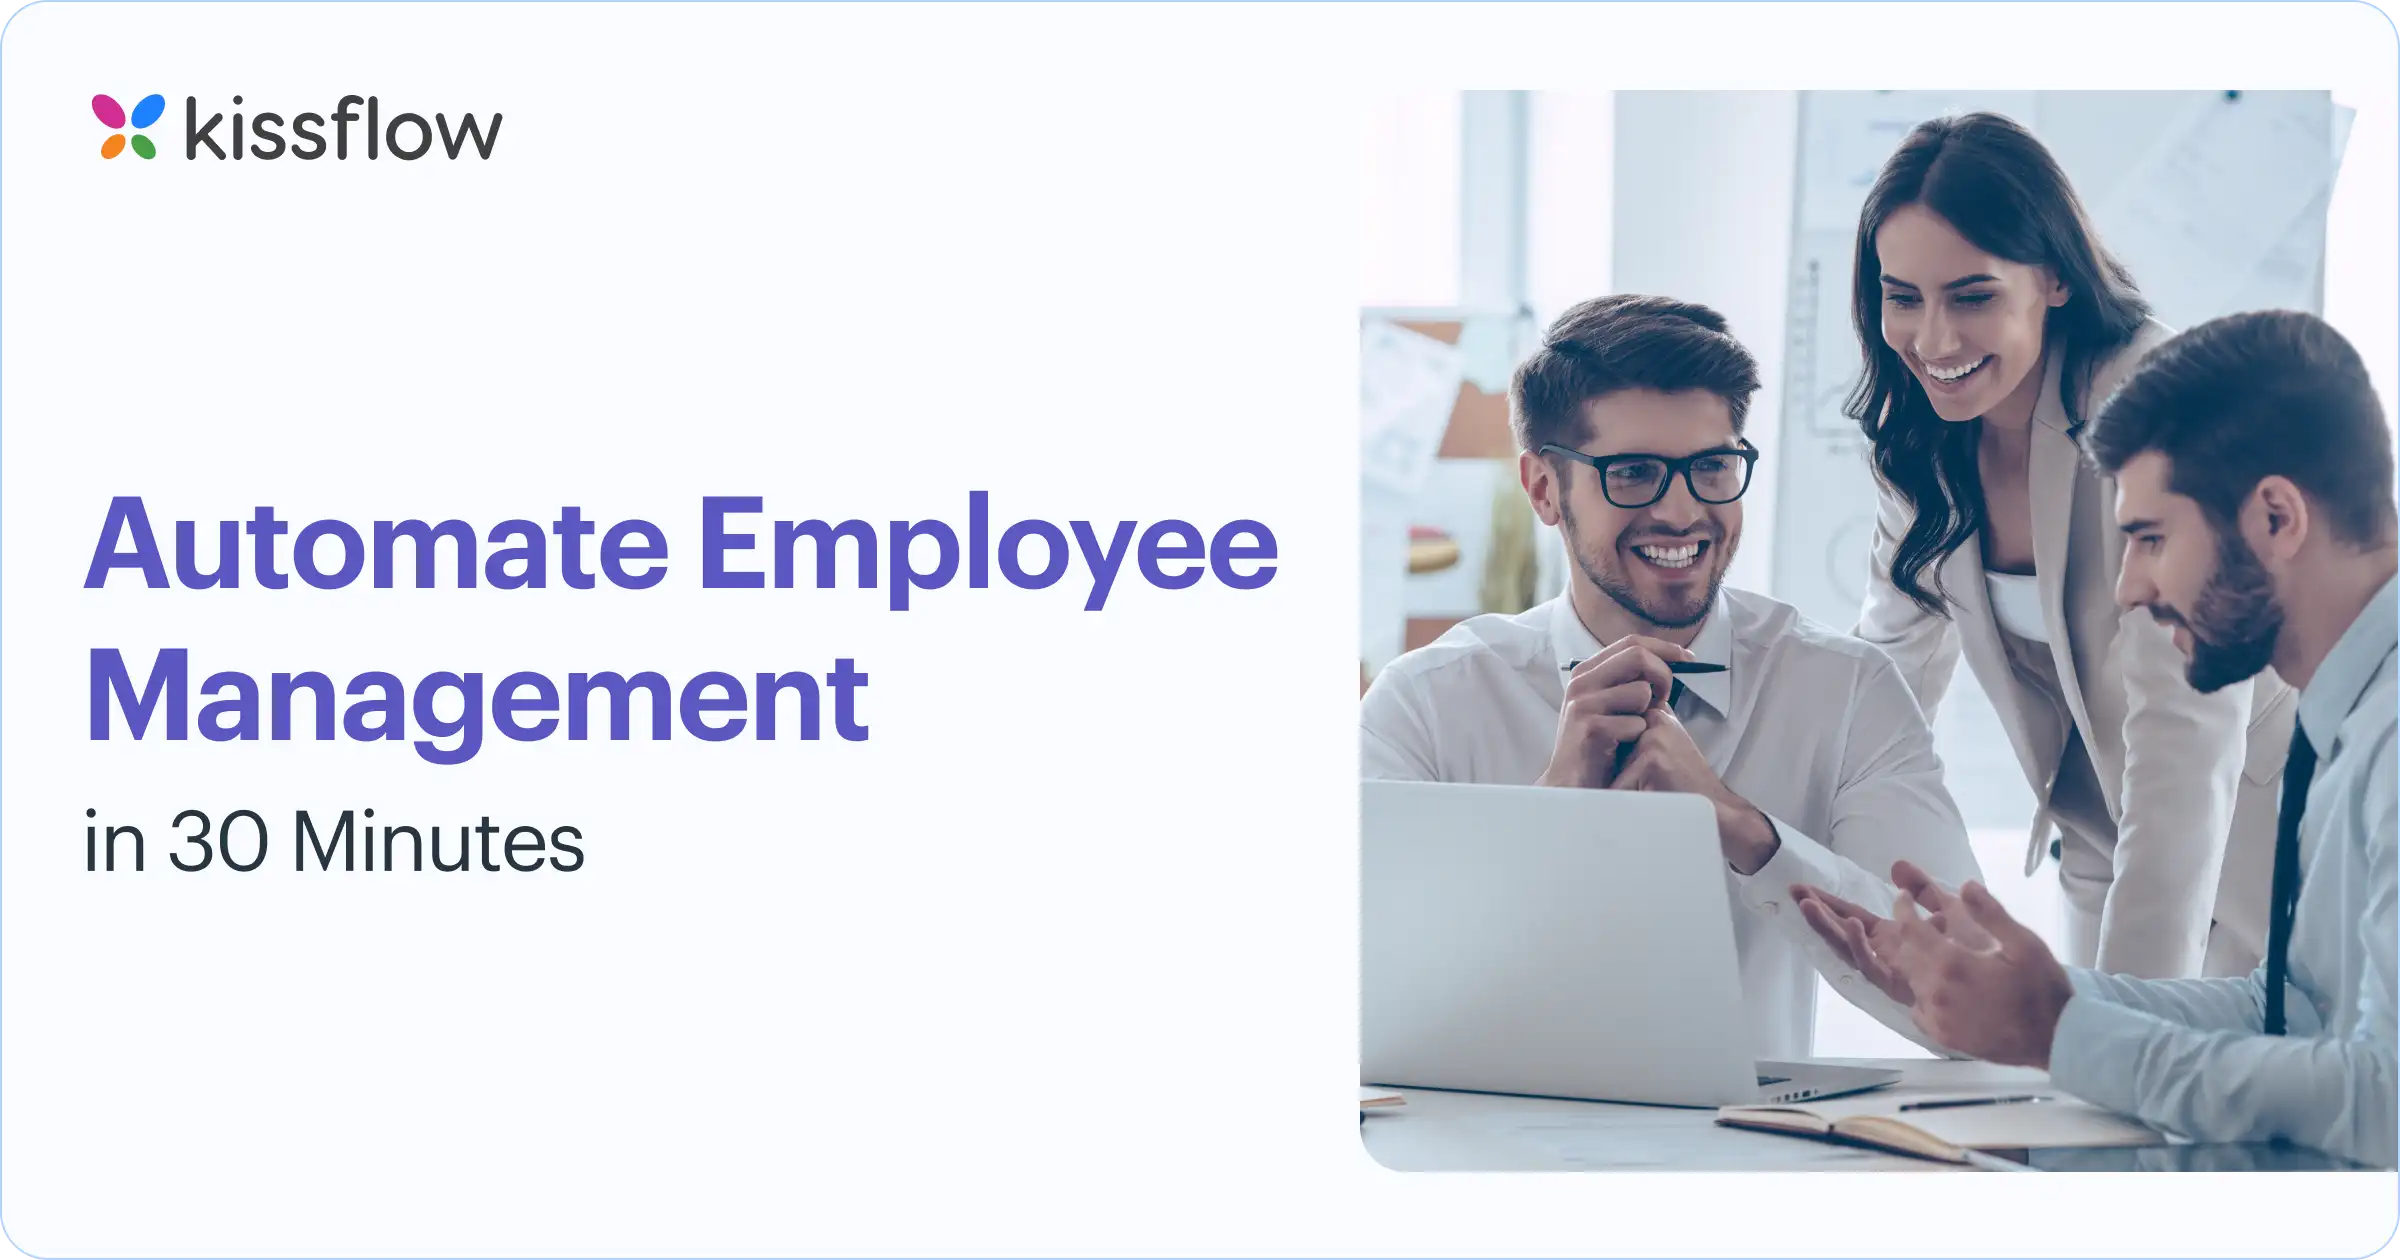 Automate Employee Management in 30 minutes